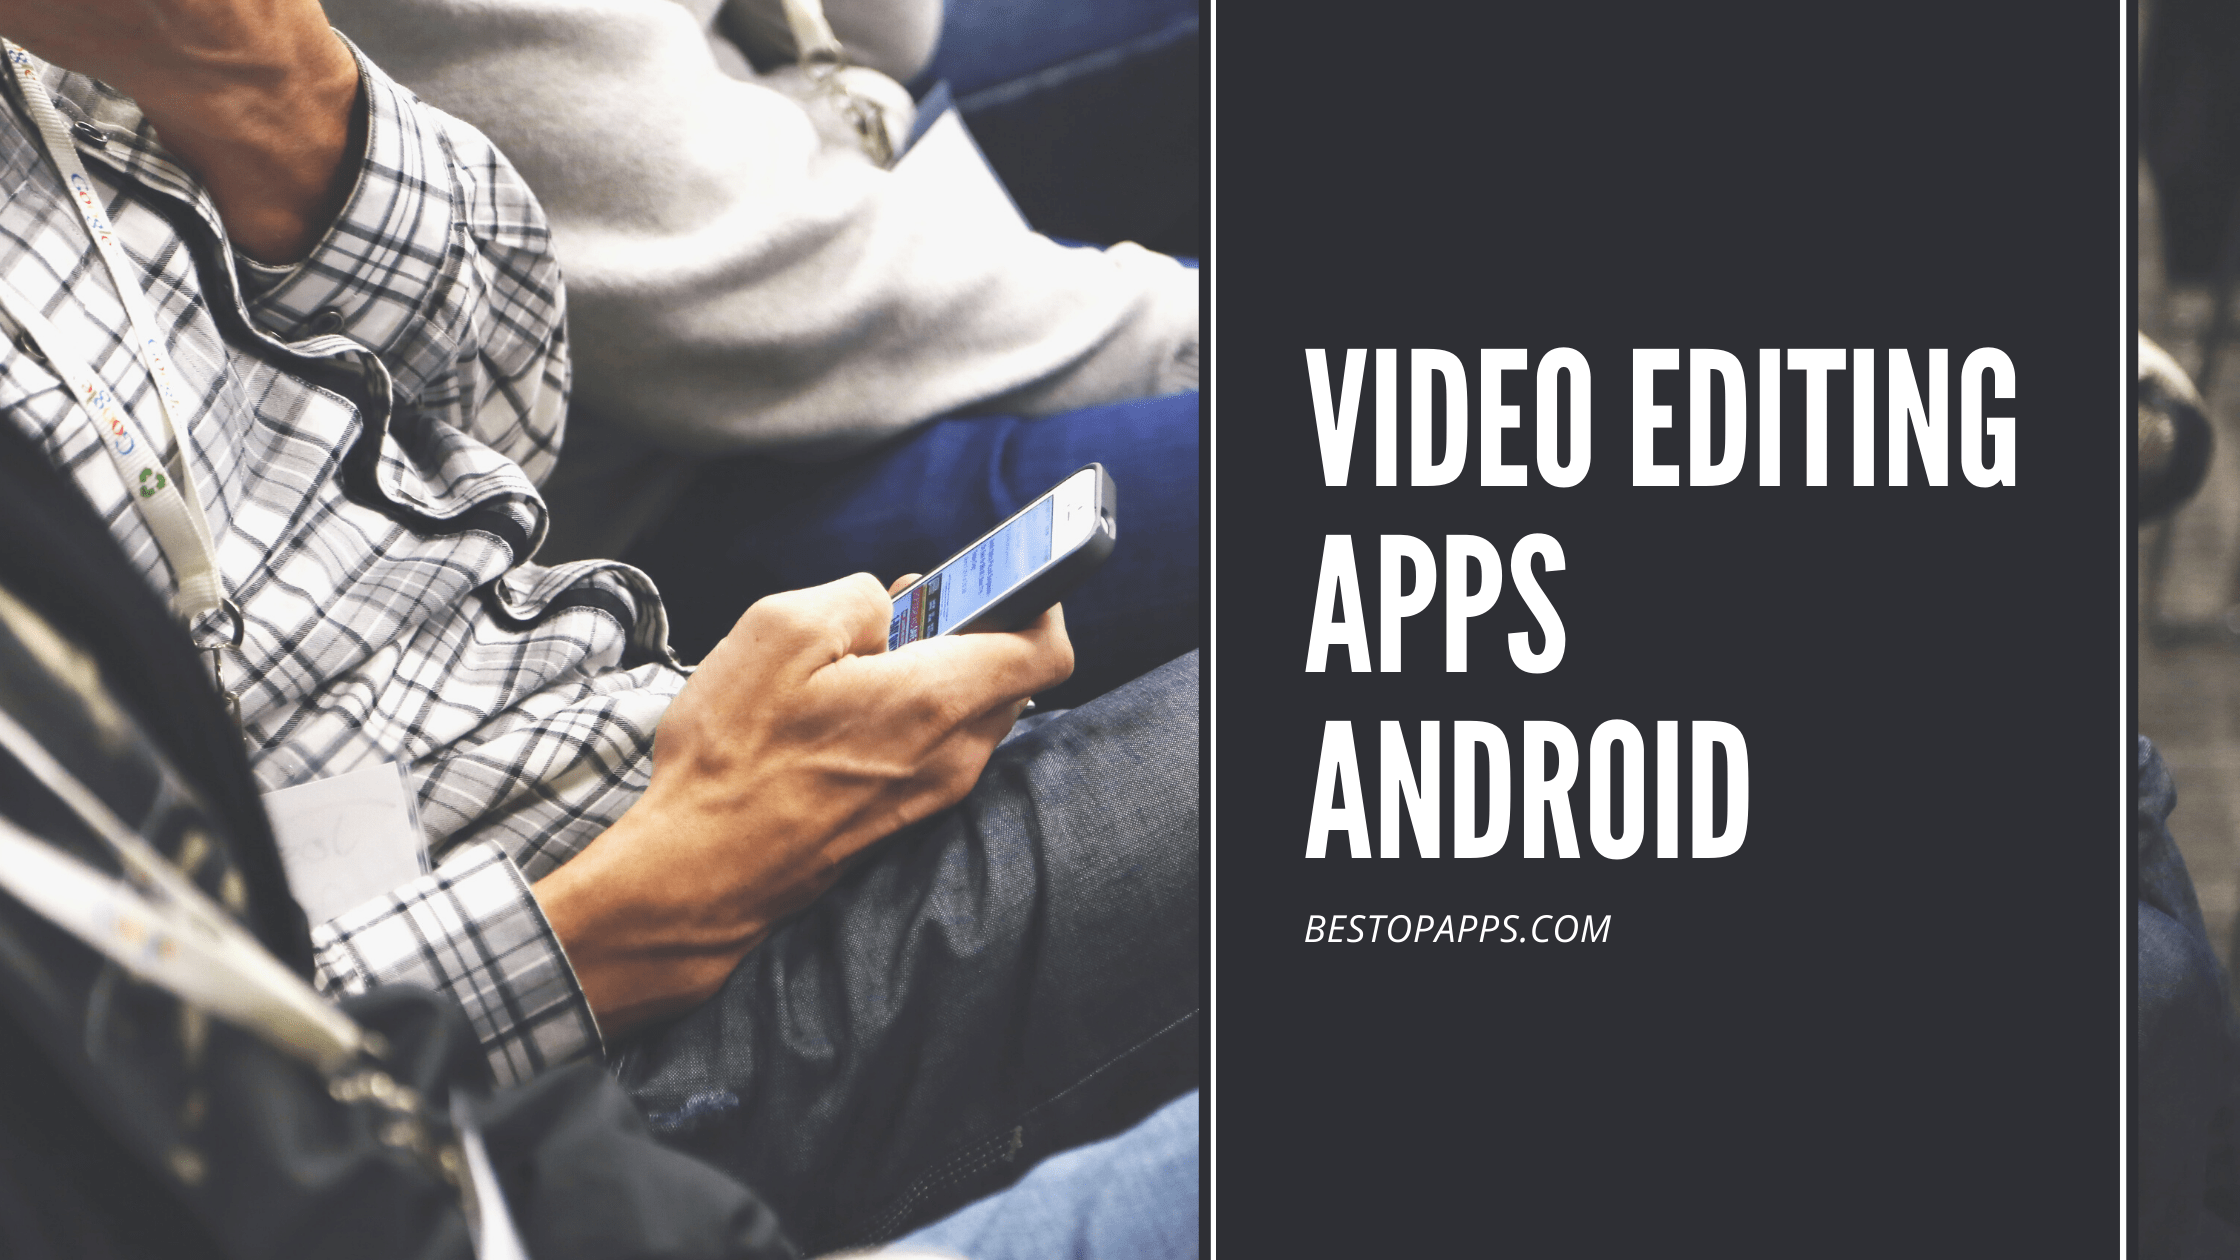 VIDEO EDITING Apps ANDROID